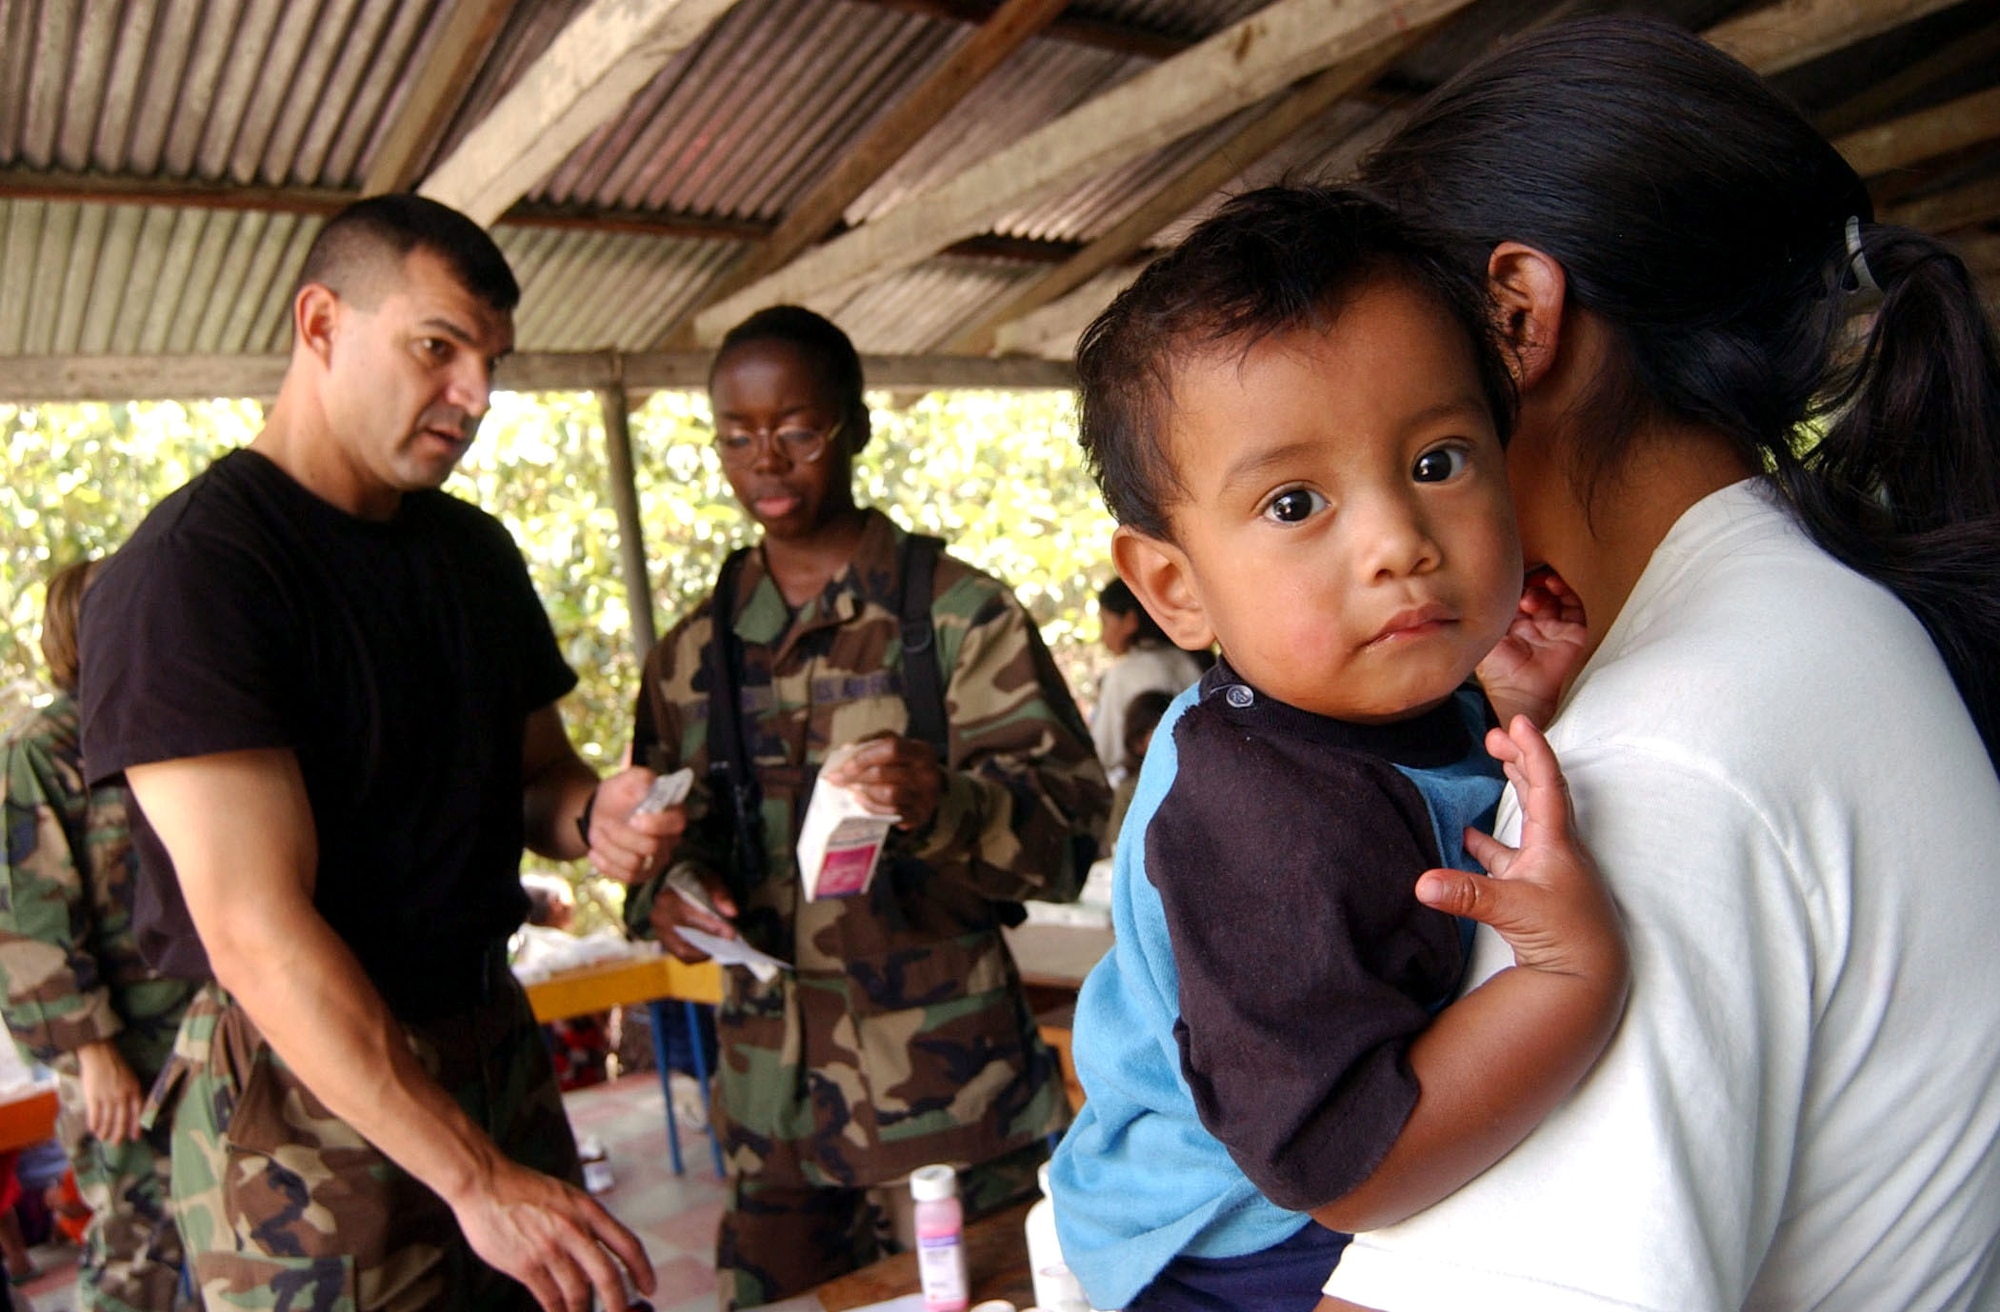 Master Sgt. Alvaro Magana, left, and Staff Sgt. Natasha Johnson explain to a mother the recommended dosage for her son while dispensing medication during a Medical Readiness Training Exercise June 29 in El Horno, Honduras. Sergeants Magana and Johnson are both from the Medical Element at Soto Cano Air Base, Honduras. (U.S. Air Force photo/Tech. Sgt. Sonny Cohrs) 
         